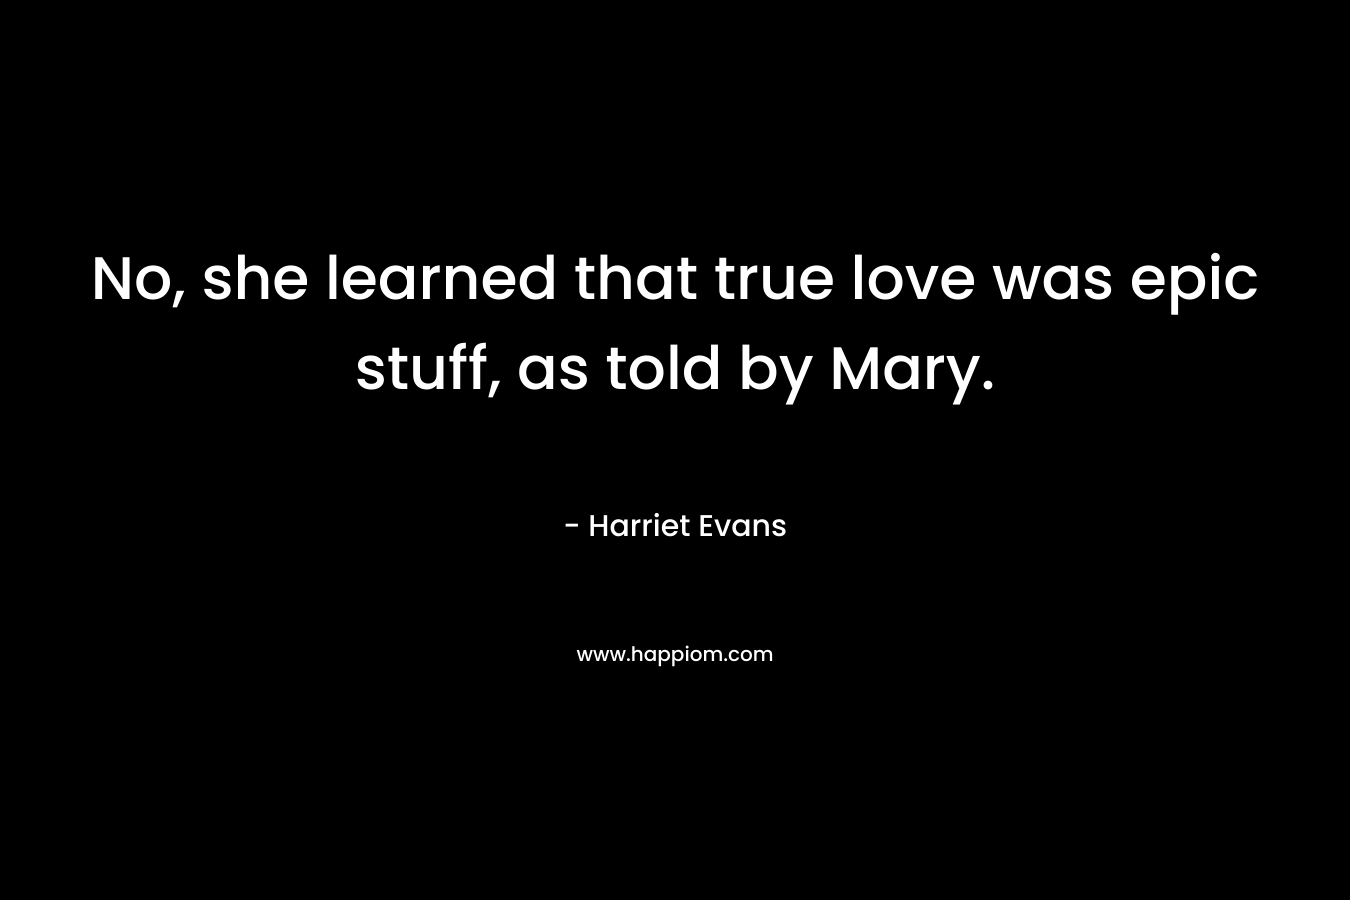 No, she learned that true love was epic stuff, as told by Mary. – Harriet Evans